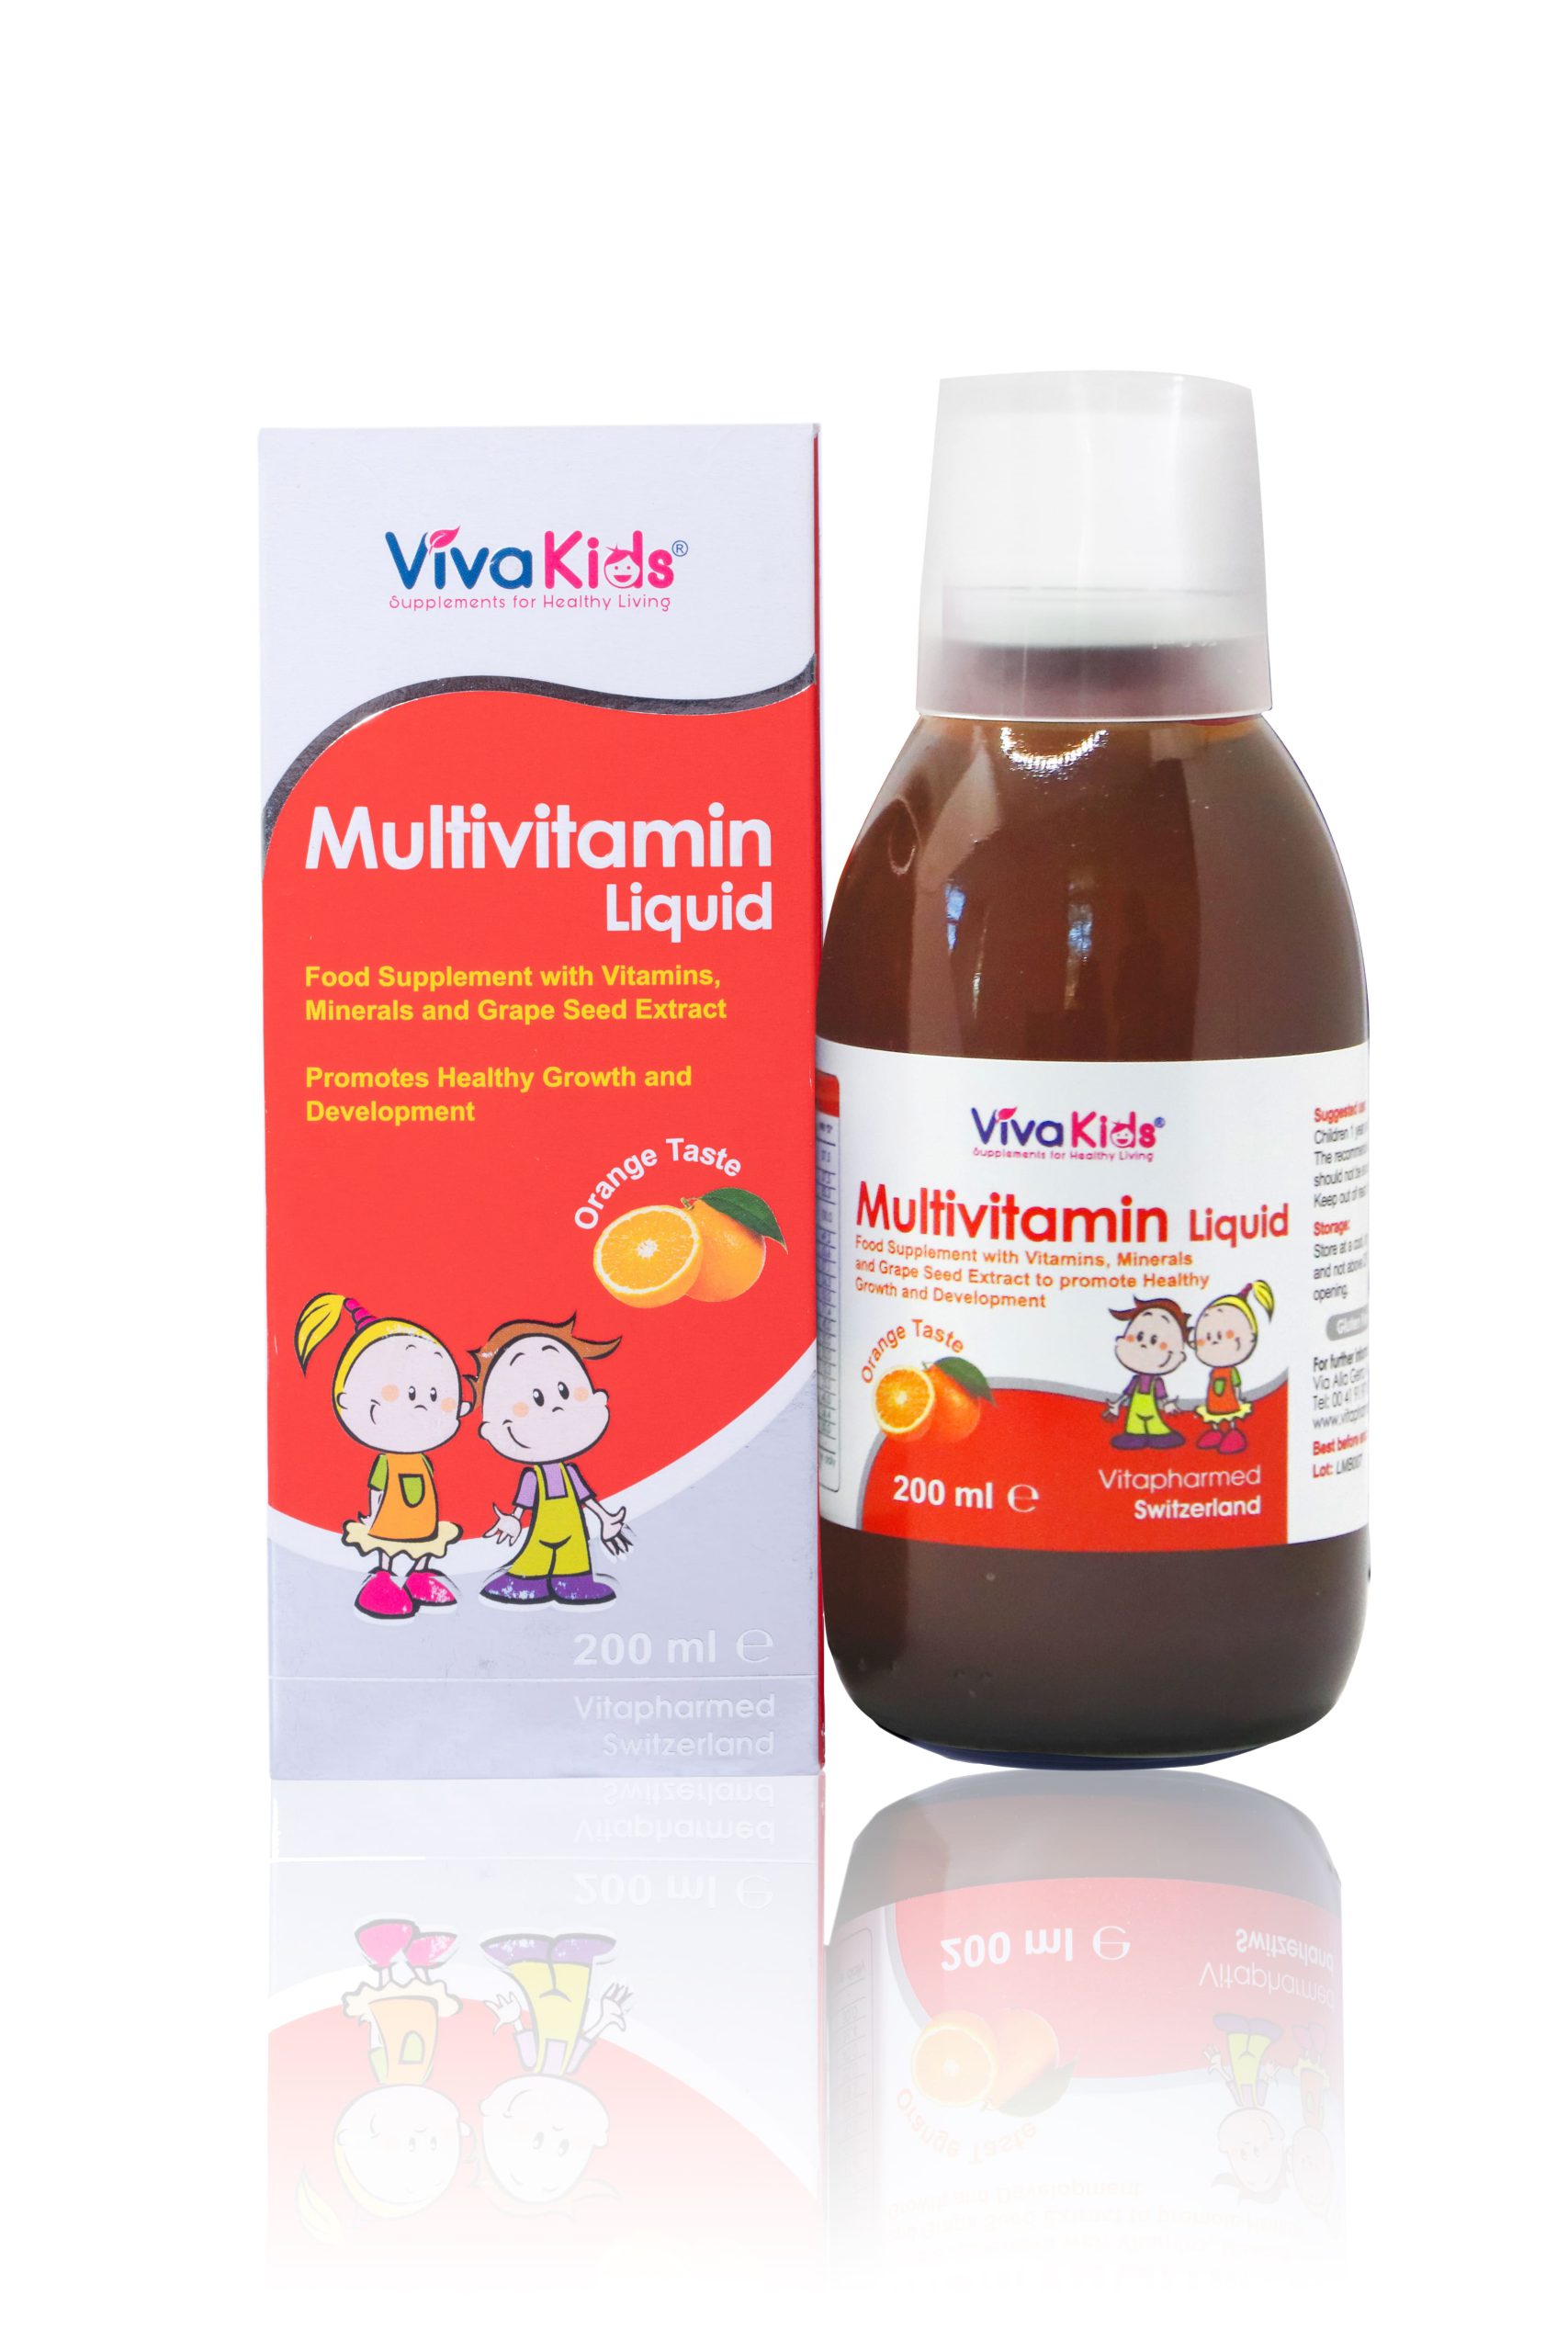 Benefits of multivitamin liquid for overall health and well-being